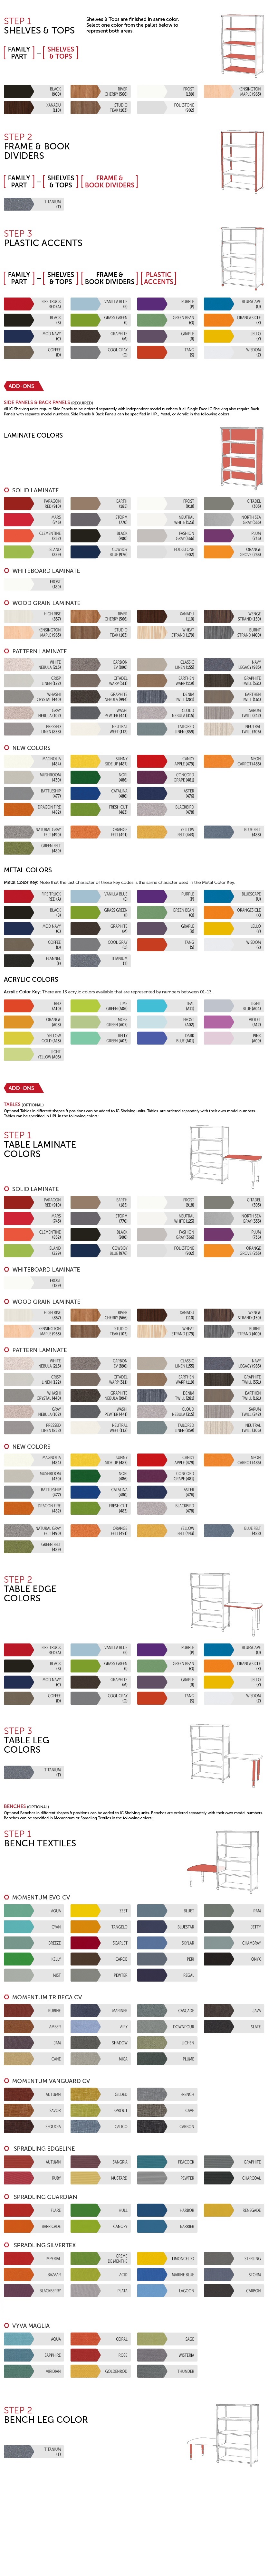 INFORMATION COMMONS SHELVING COLORS - PARAGON FURNITURE